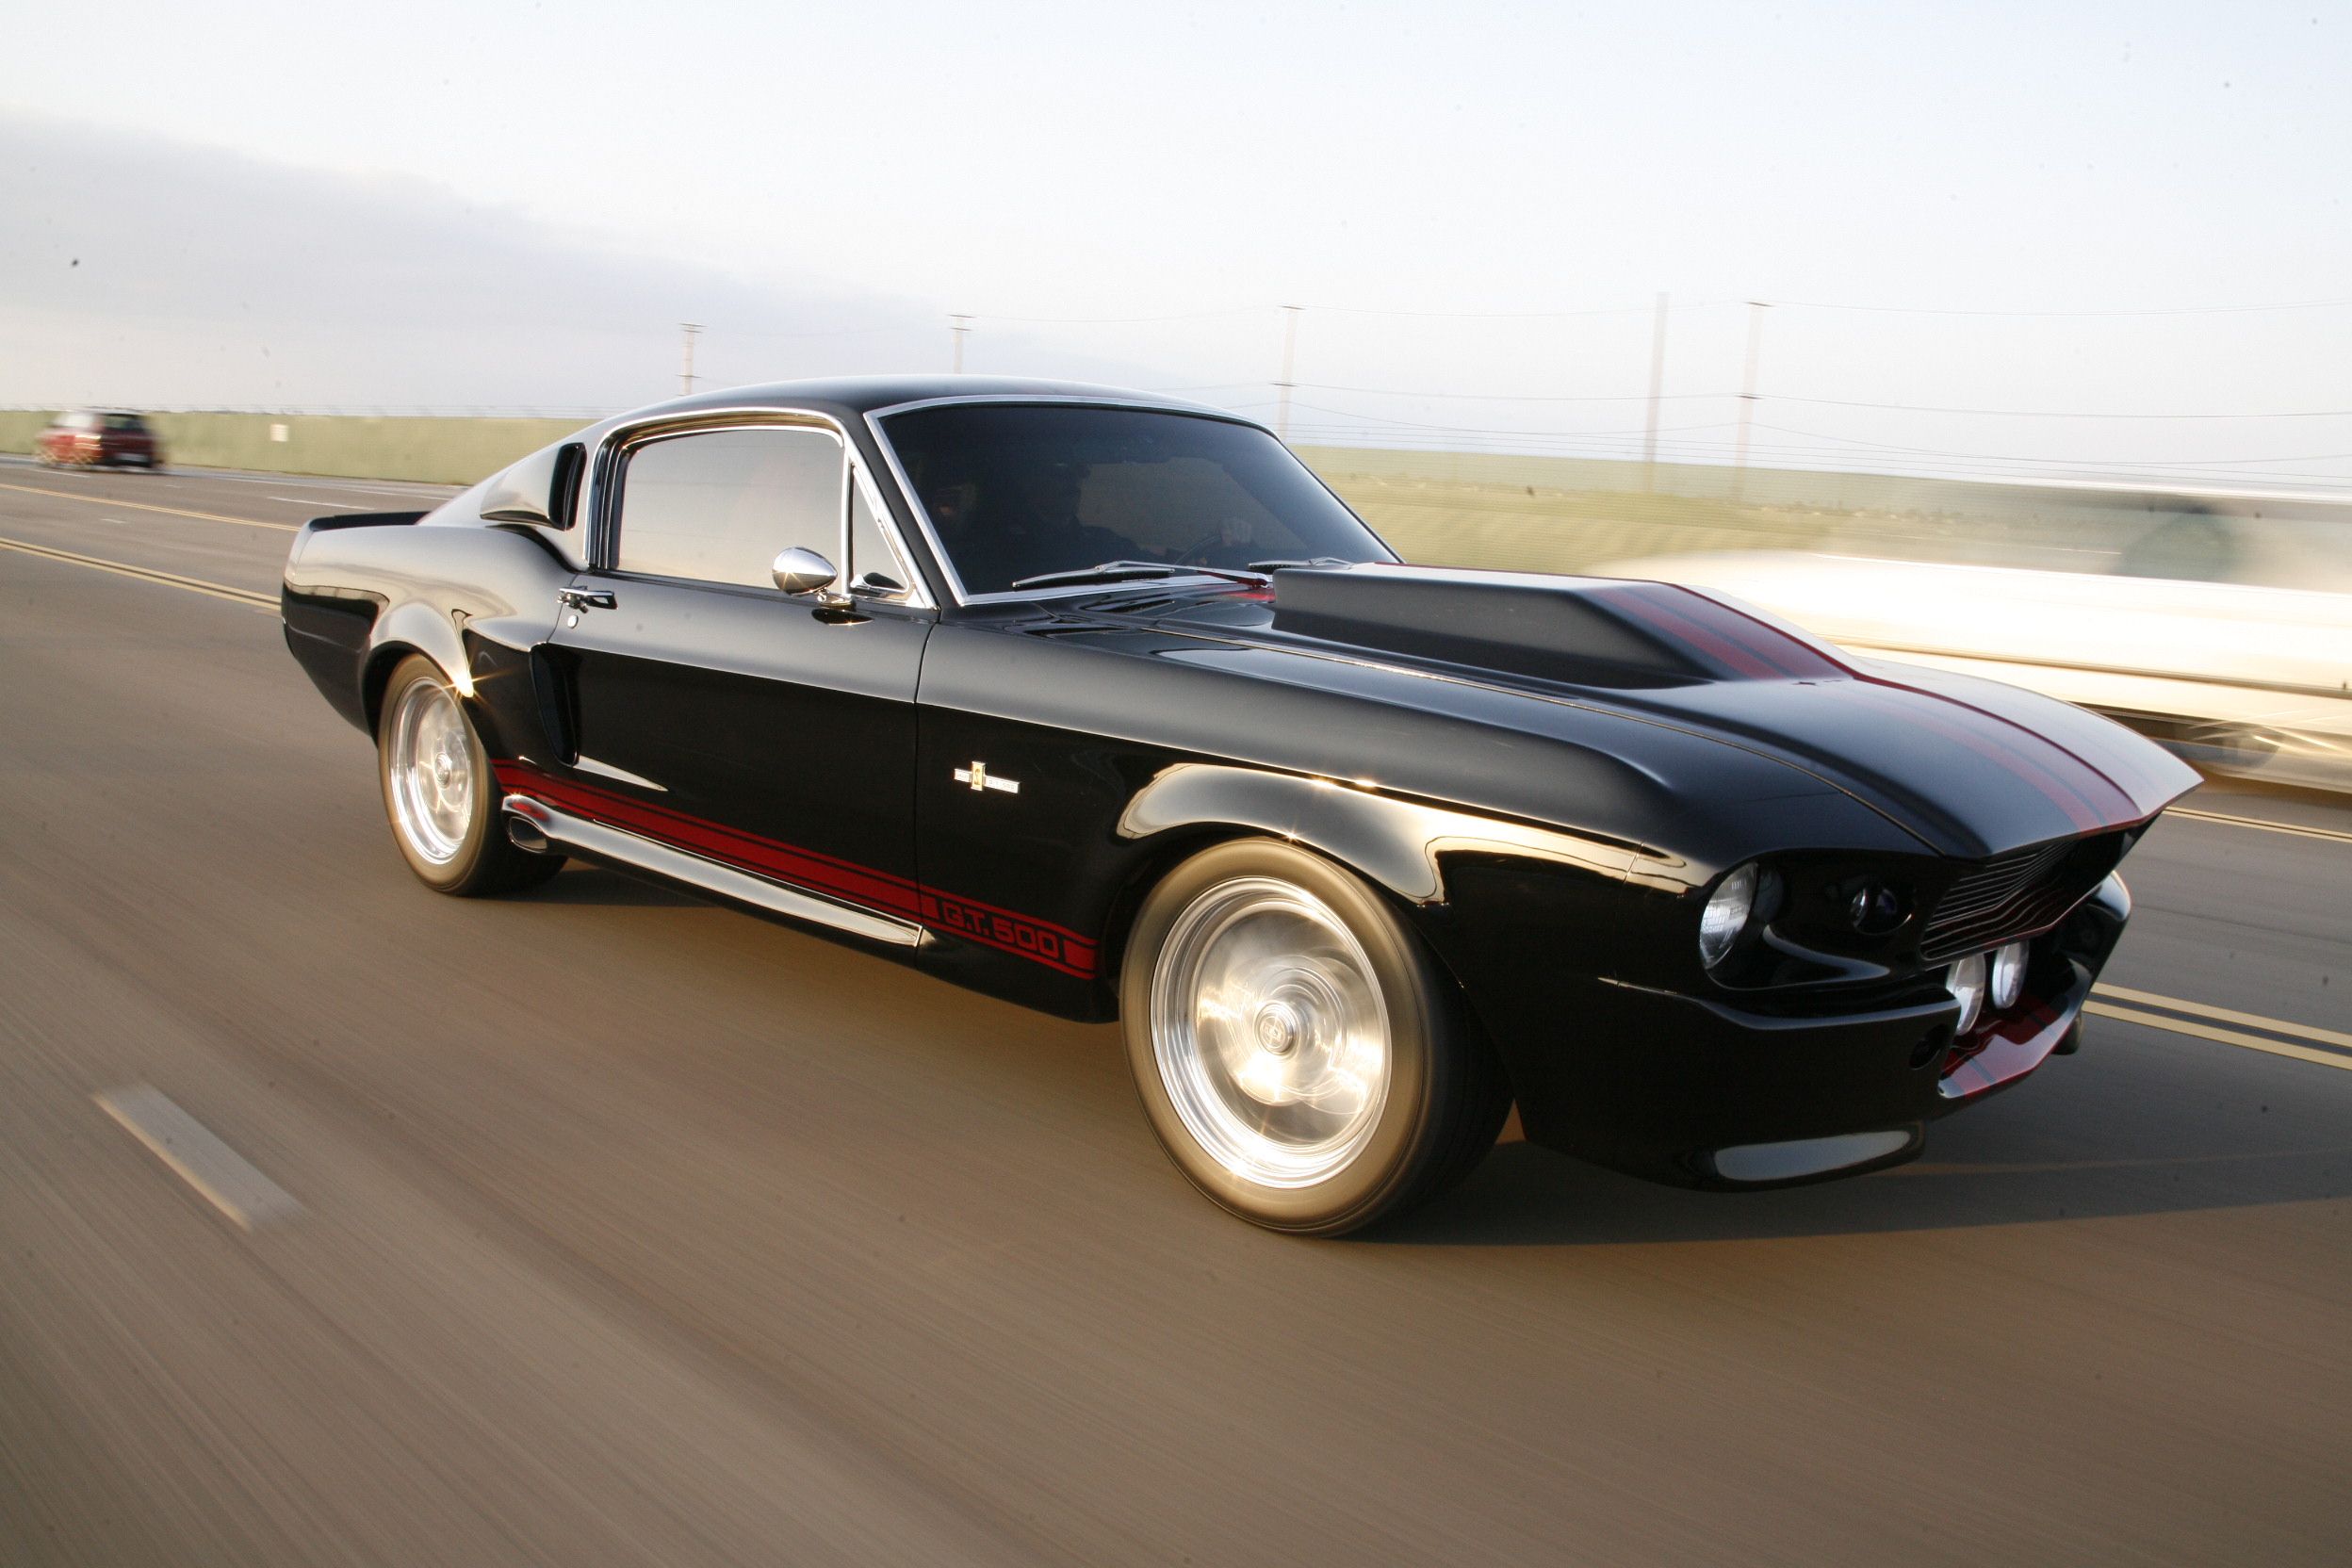 Mustang 67, Wallpaper - Ford Mustang Fastback , HD Wallpaper & Backgrounds